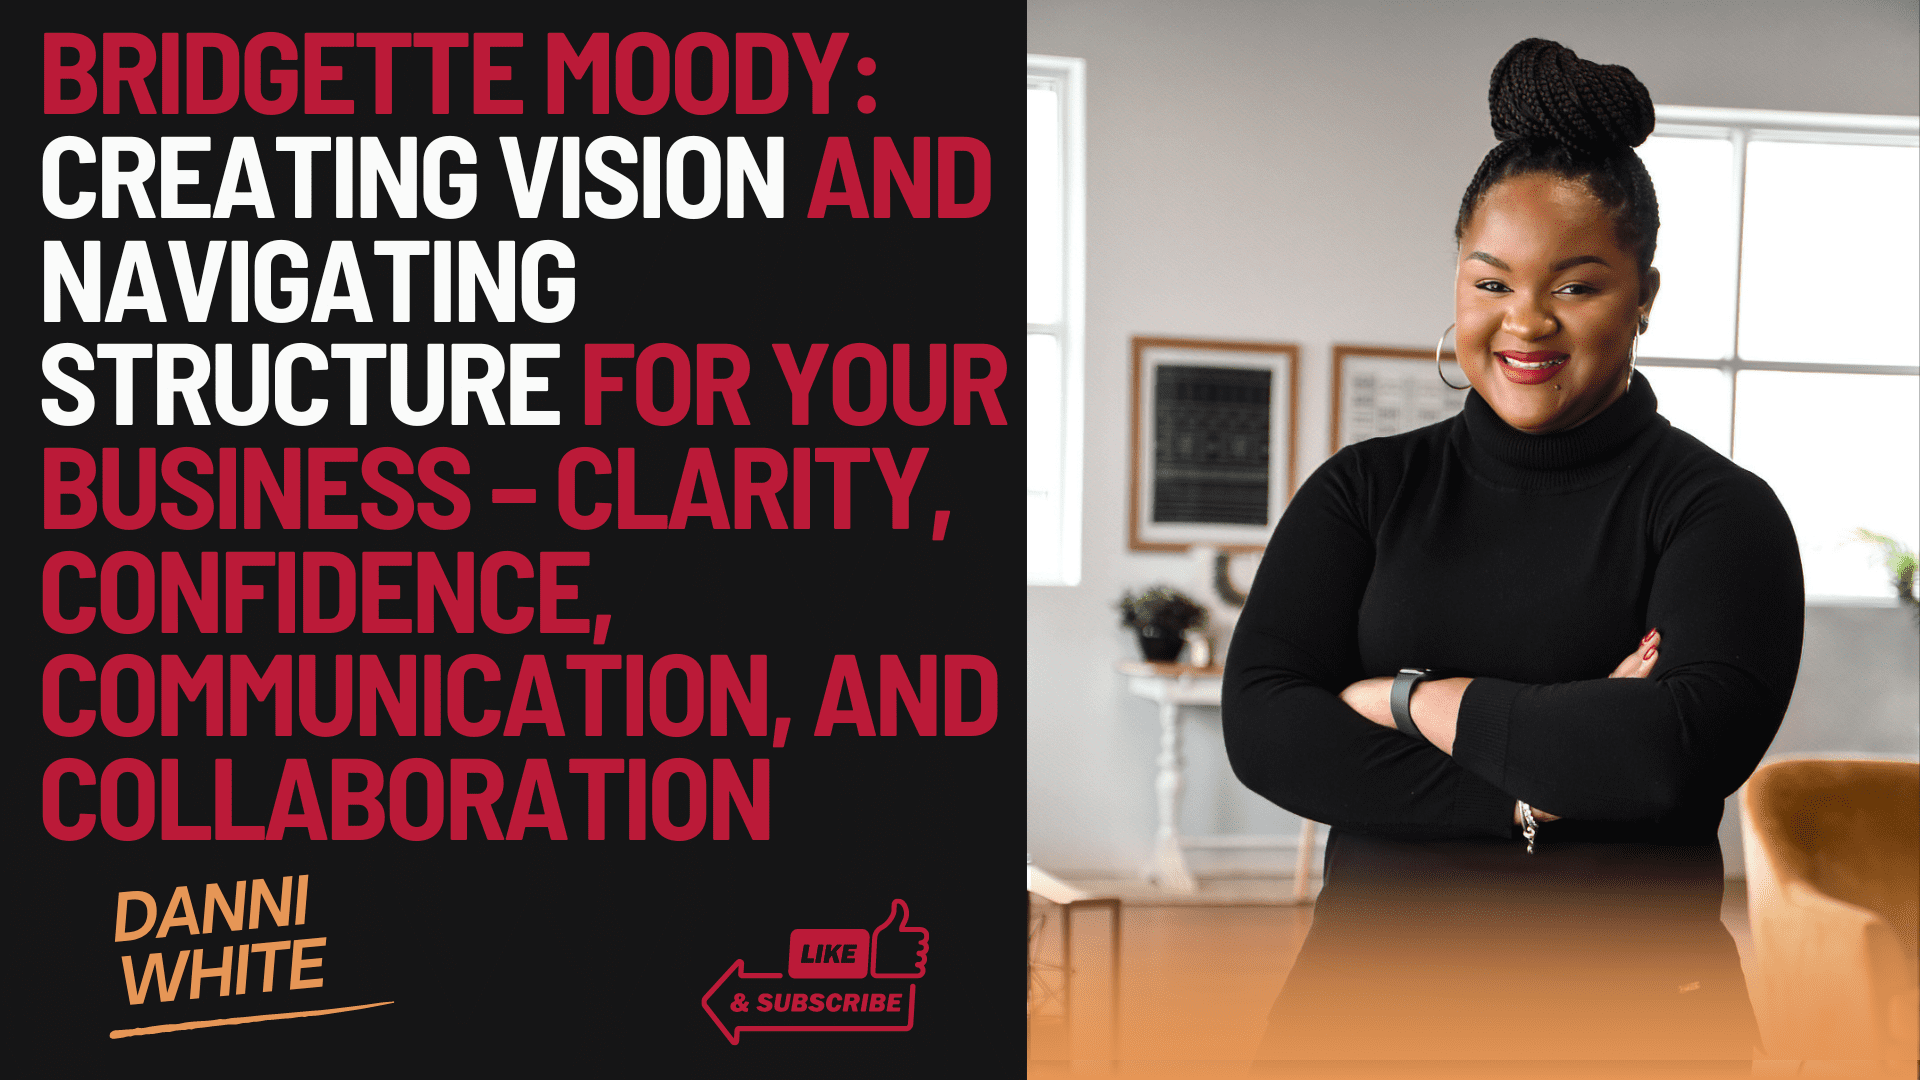 Bridgette Moody: Creating Vision and Navigating Structure for Your Business – Clarity, Confidence, Communication, and Collaboration